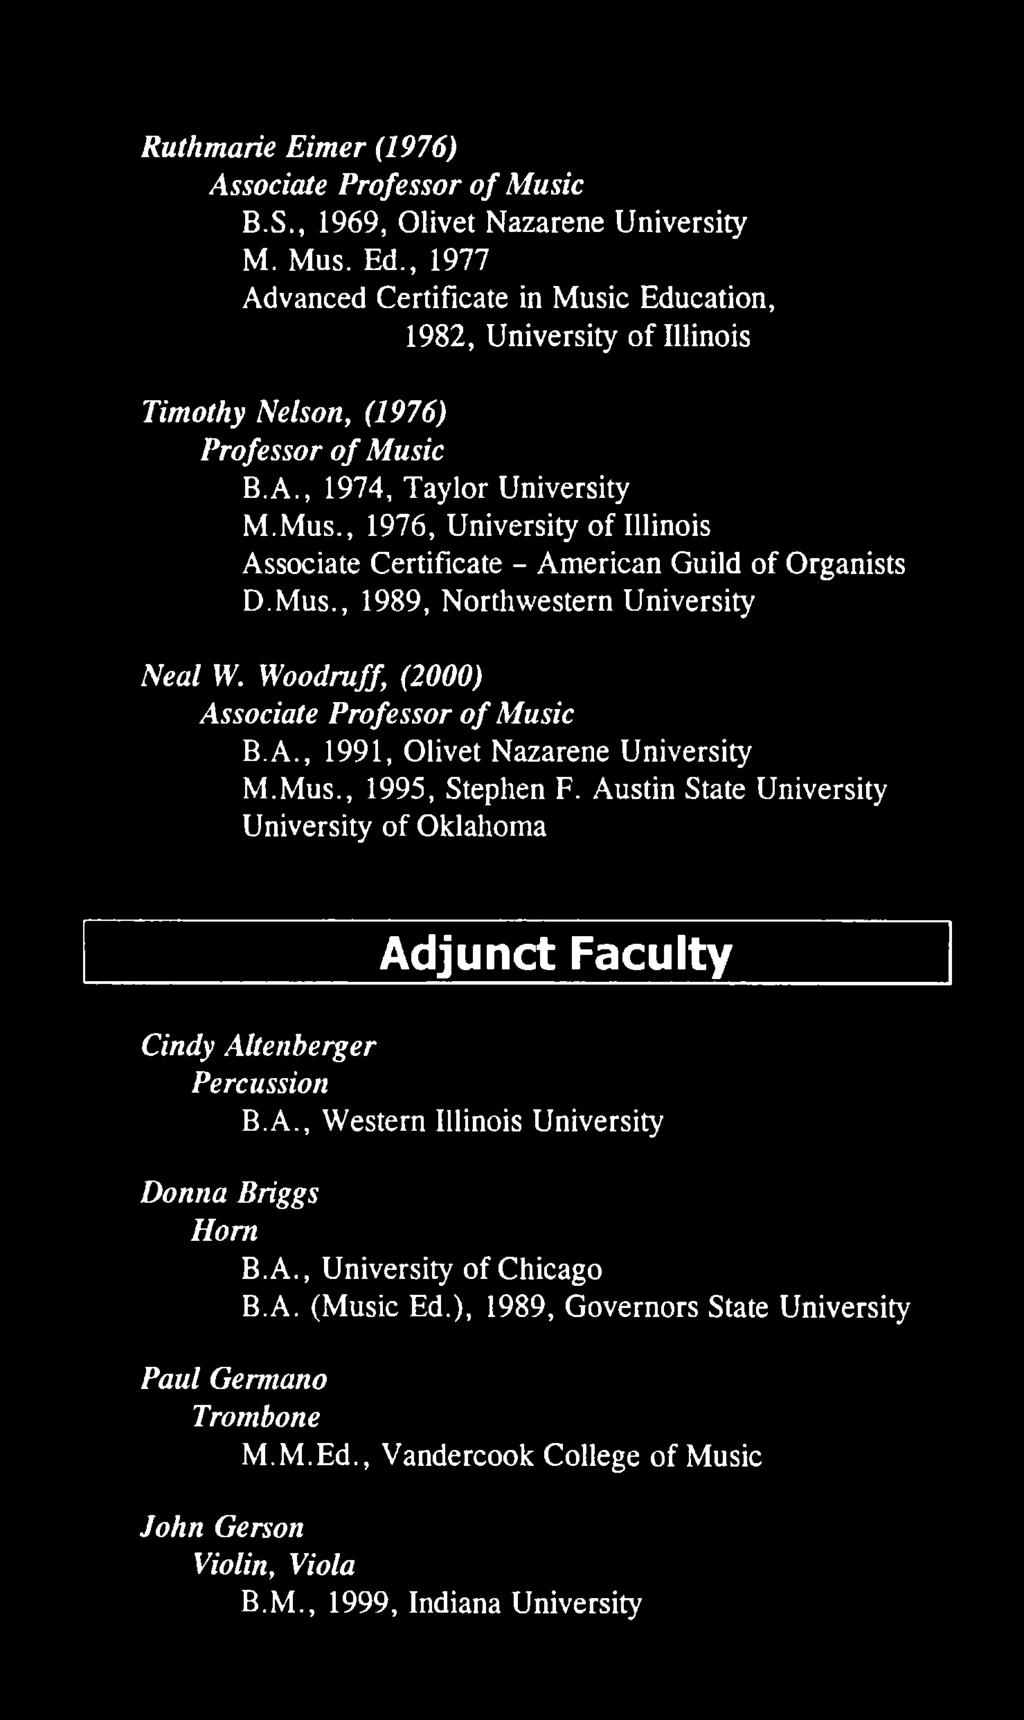 Austin State University University of Oklahoma Adjunct Faculty Cindy Altenberger Percussion B.A., Western Illinois University Donna Briggs Horn B.